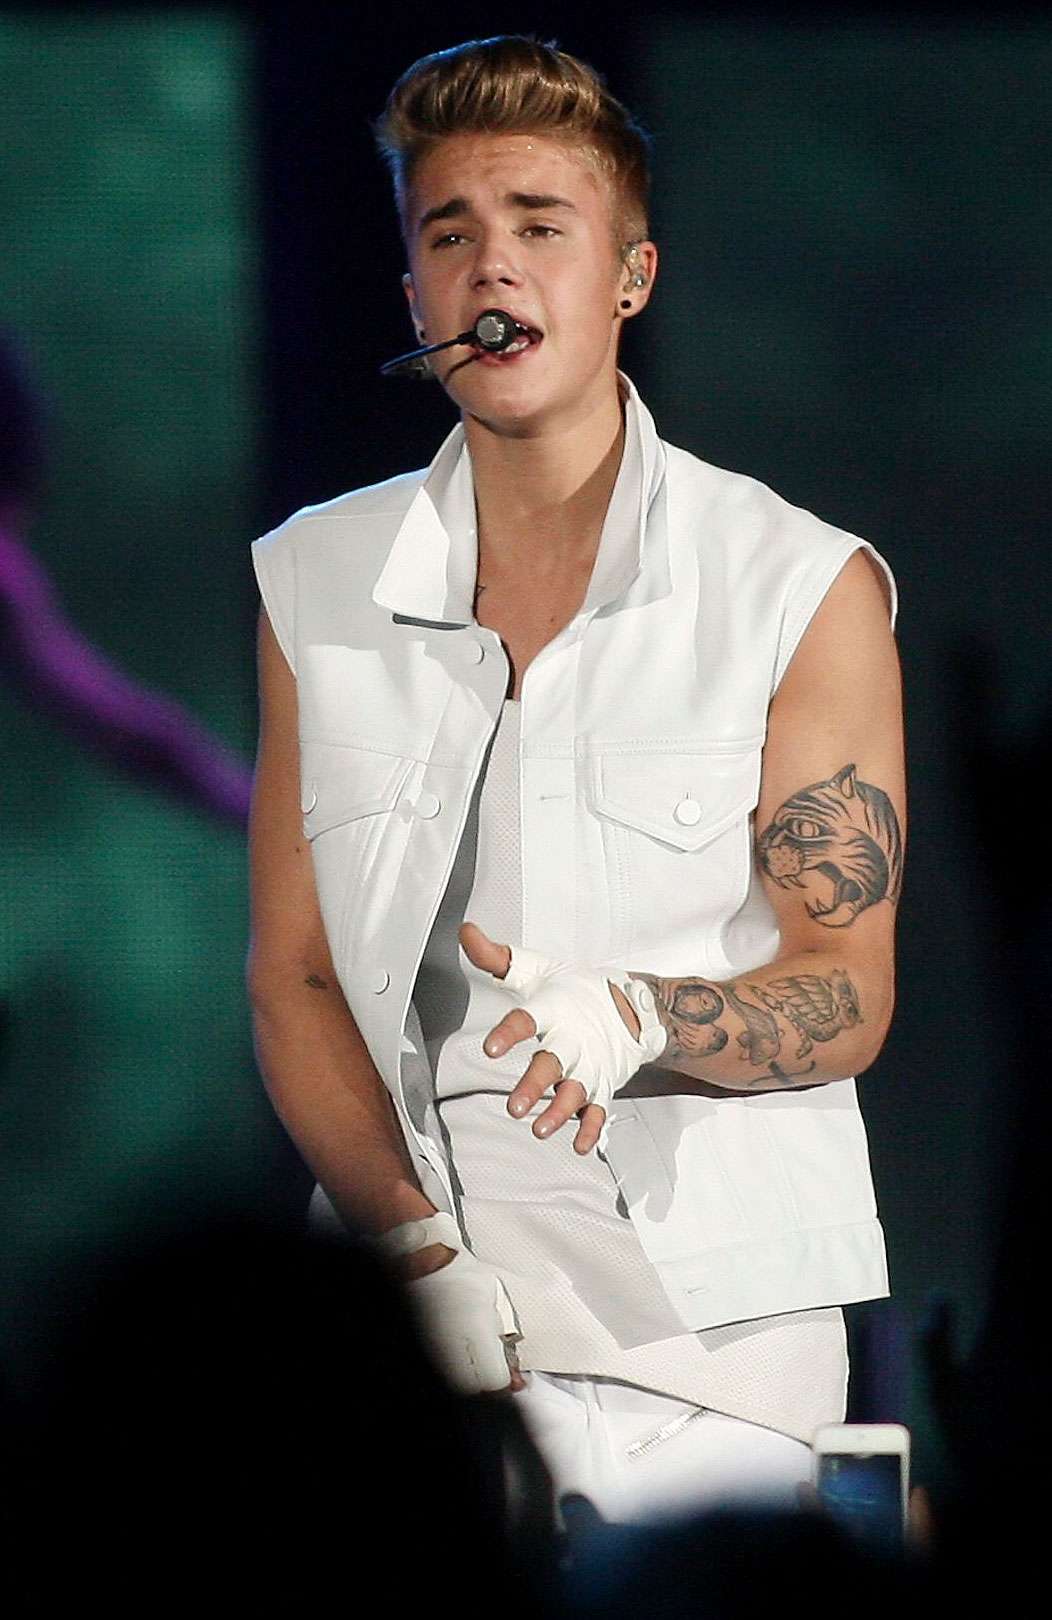 Justin Bieber Performs in Cape Town